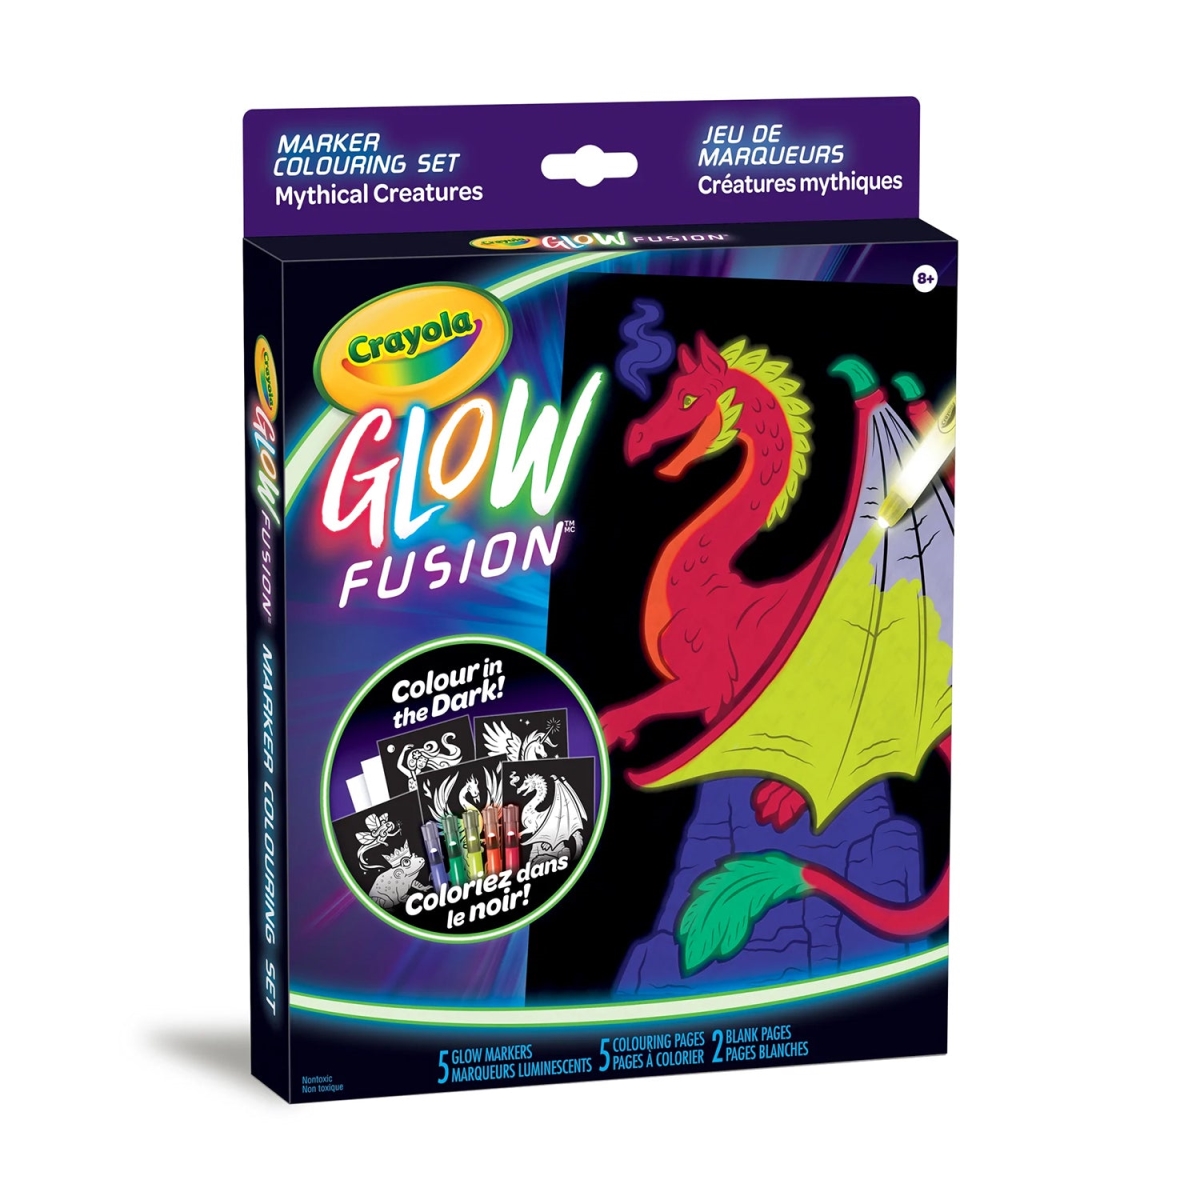 Crayola 30391935 Glow Fusion Marker Coloring Set - Mythical Creatures